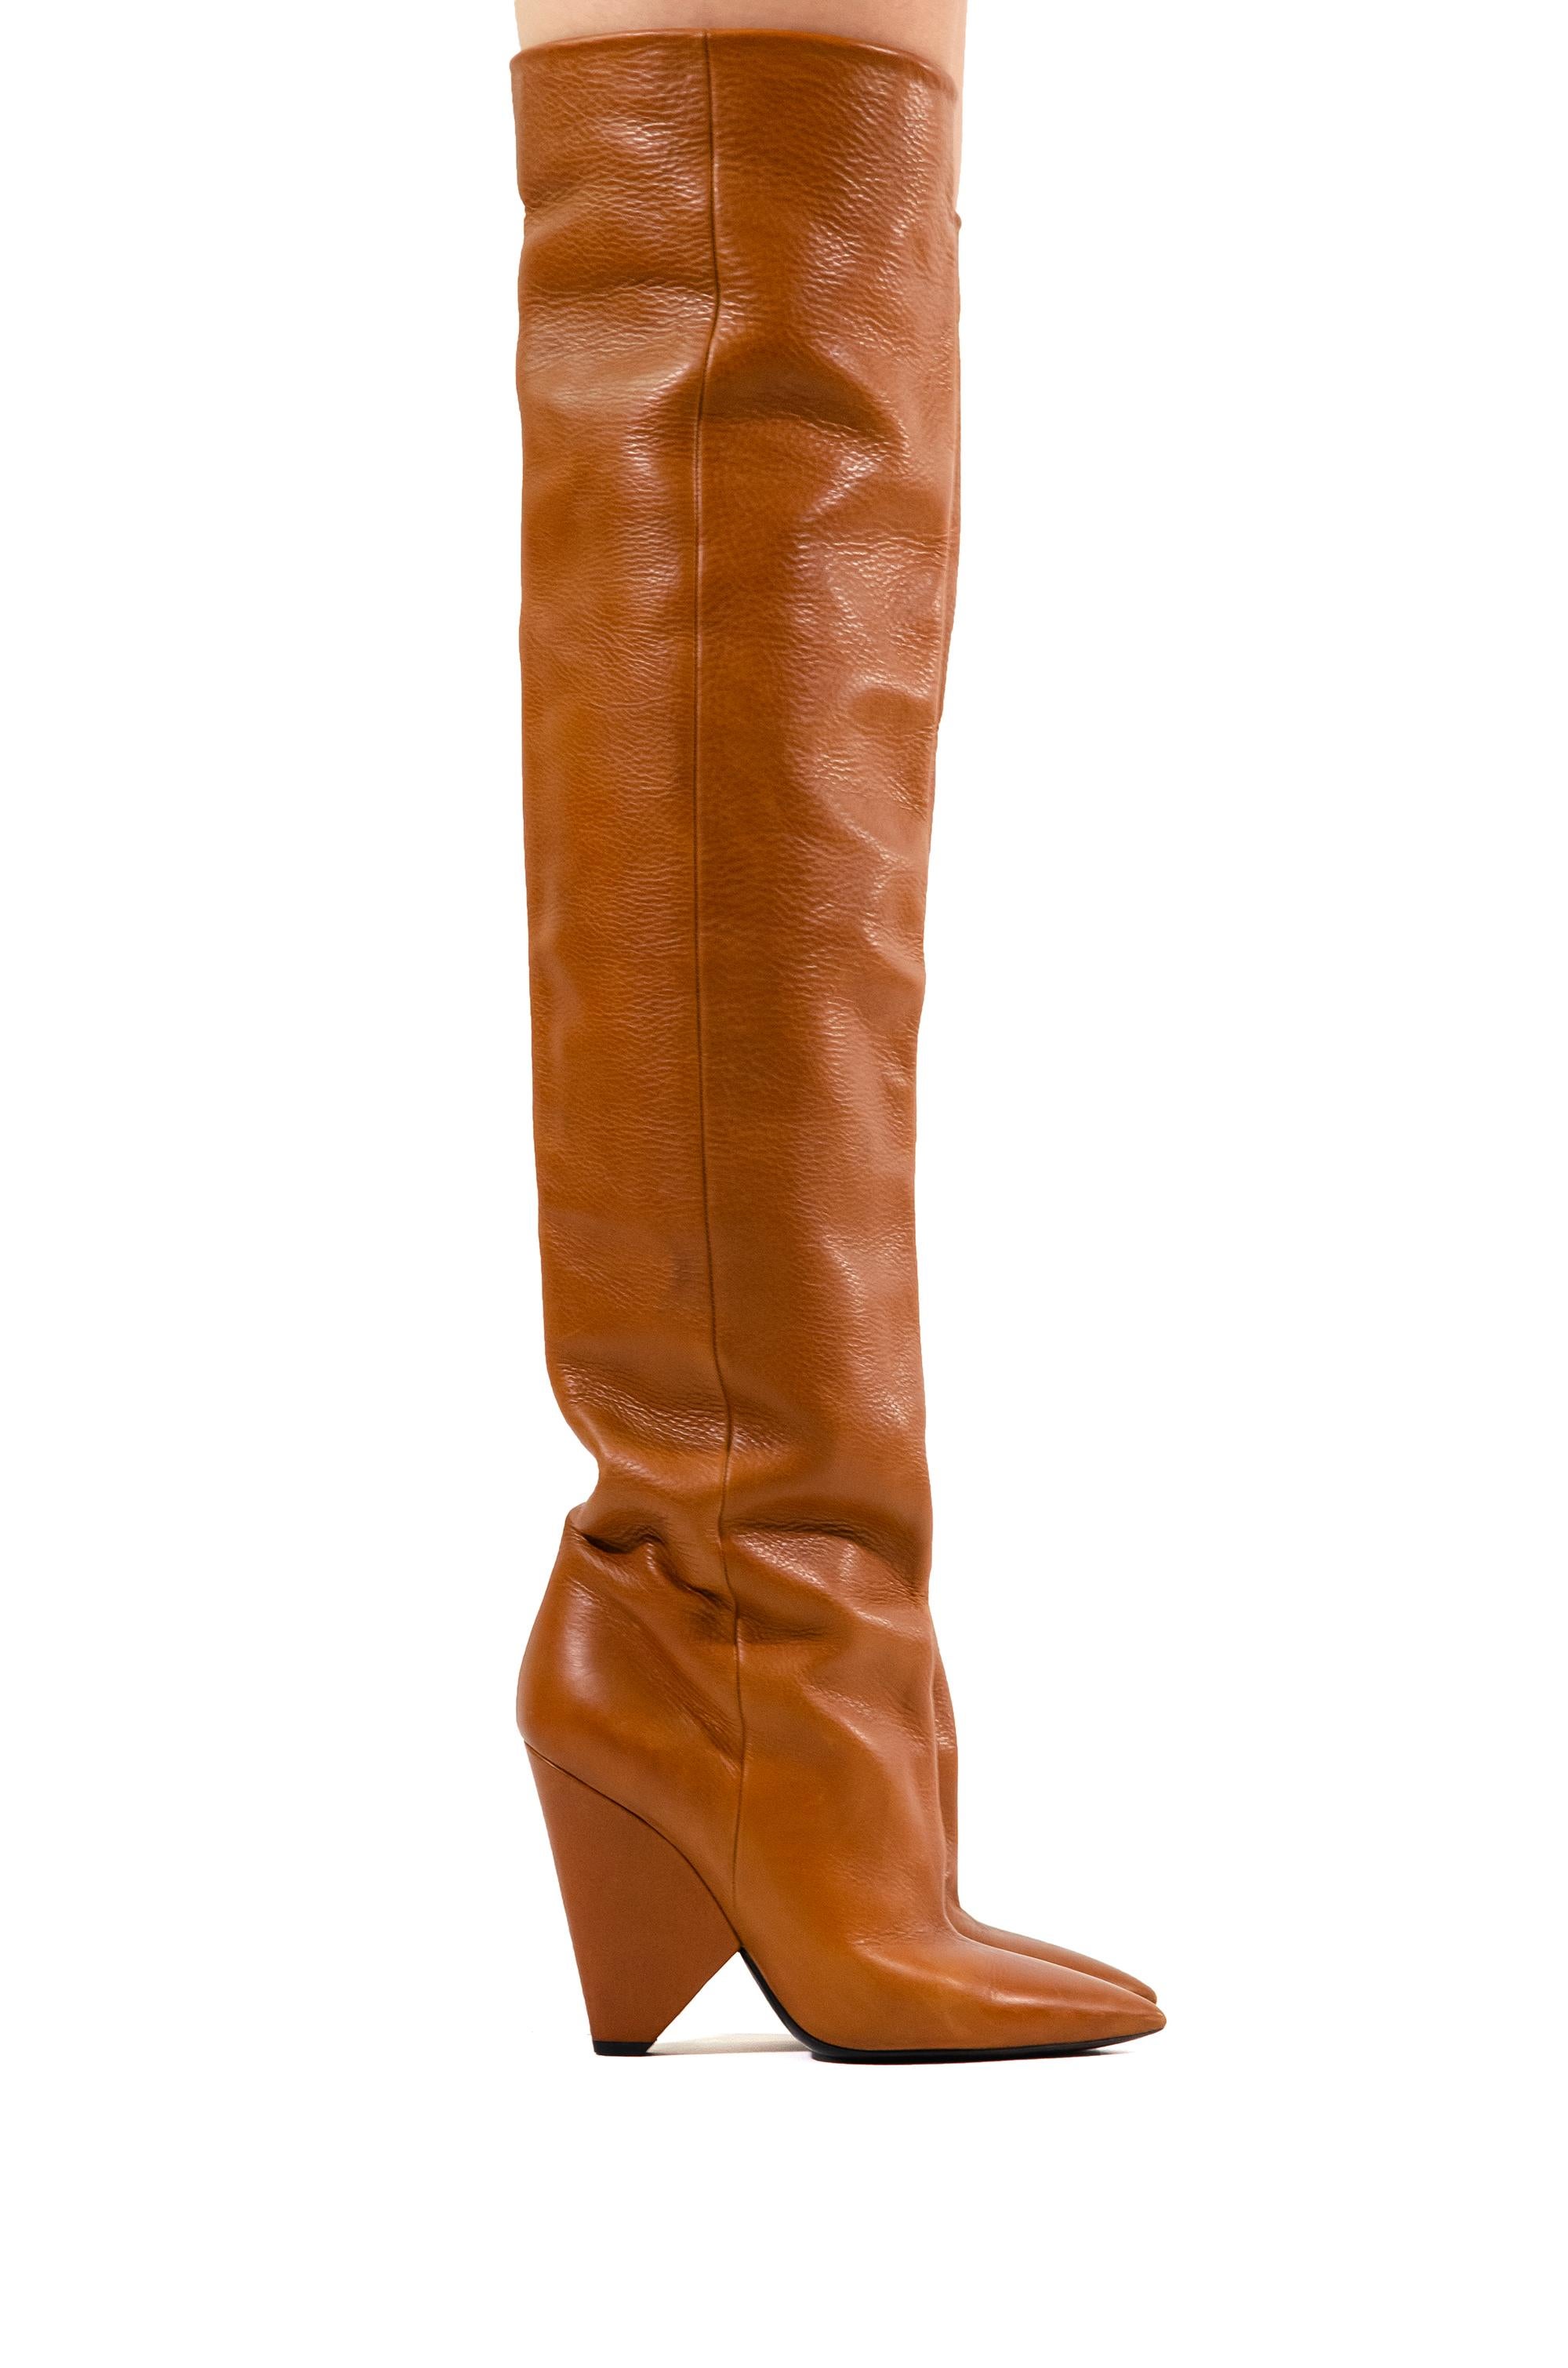 Gorgeous classic Niki boots by Saint Laurent <3

These stunning tan coloured boots made their first appearance at the f/w 2018 runway show. They are made from a soft cognac leather, they have a distinctly modern silhouette with a pointed toe and